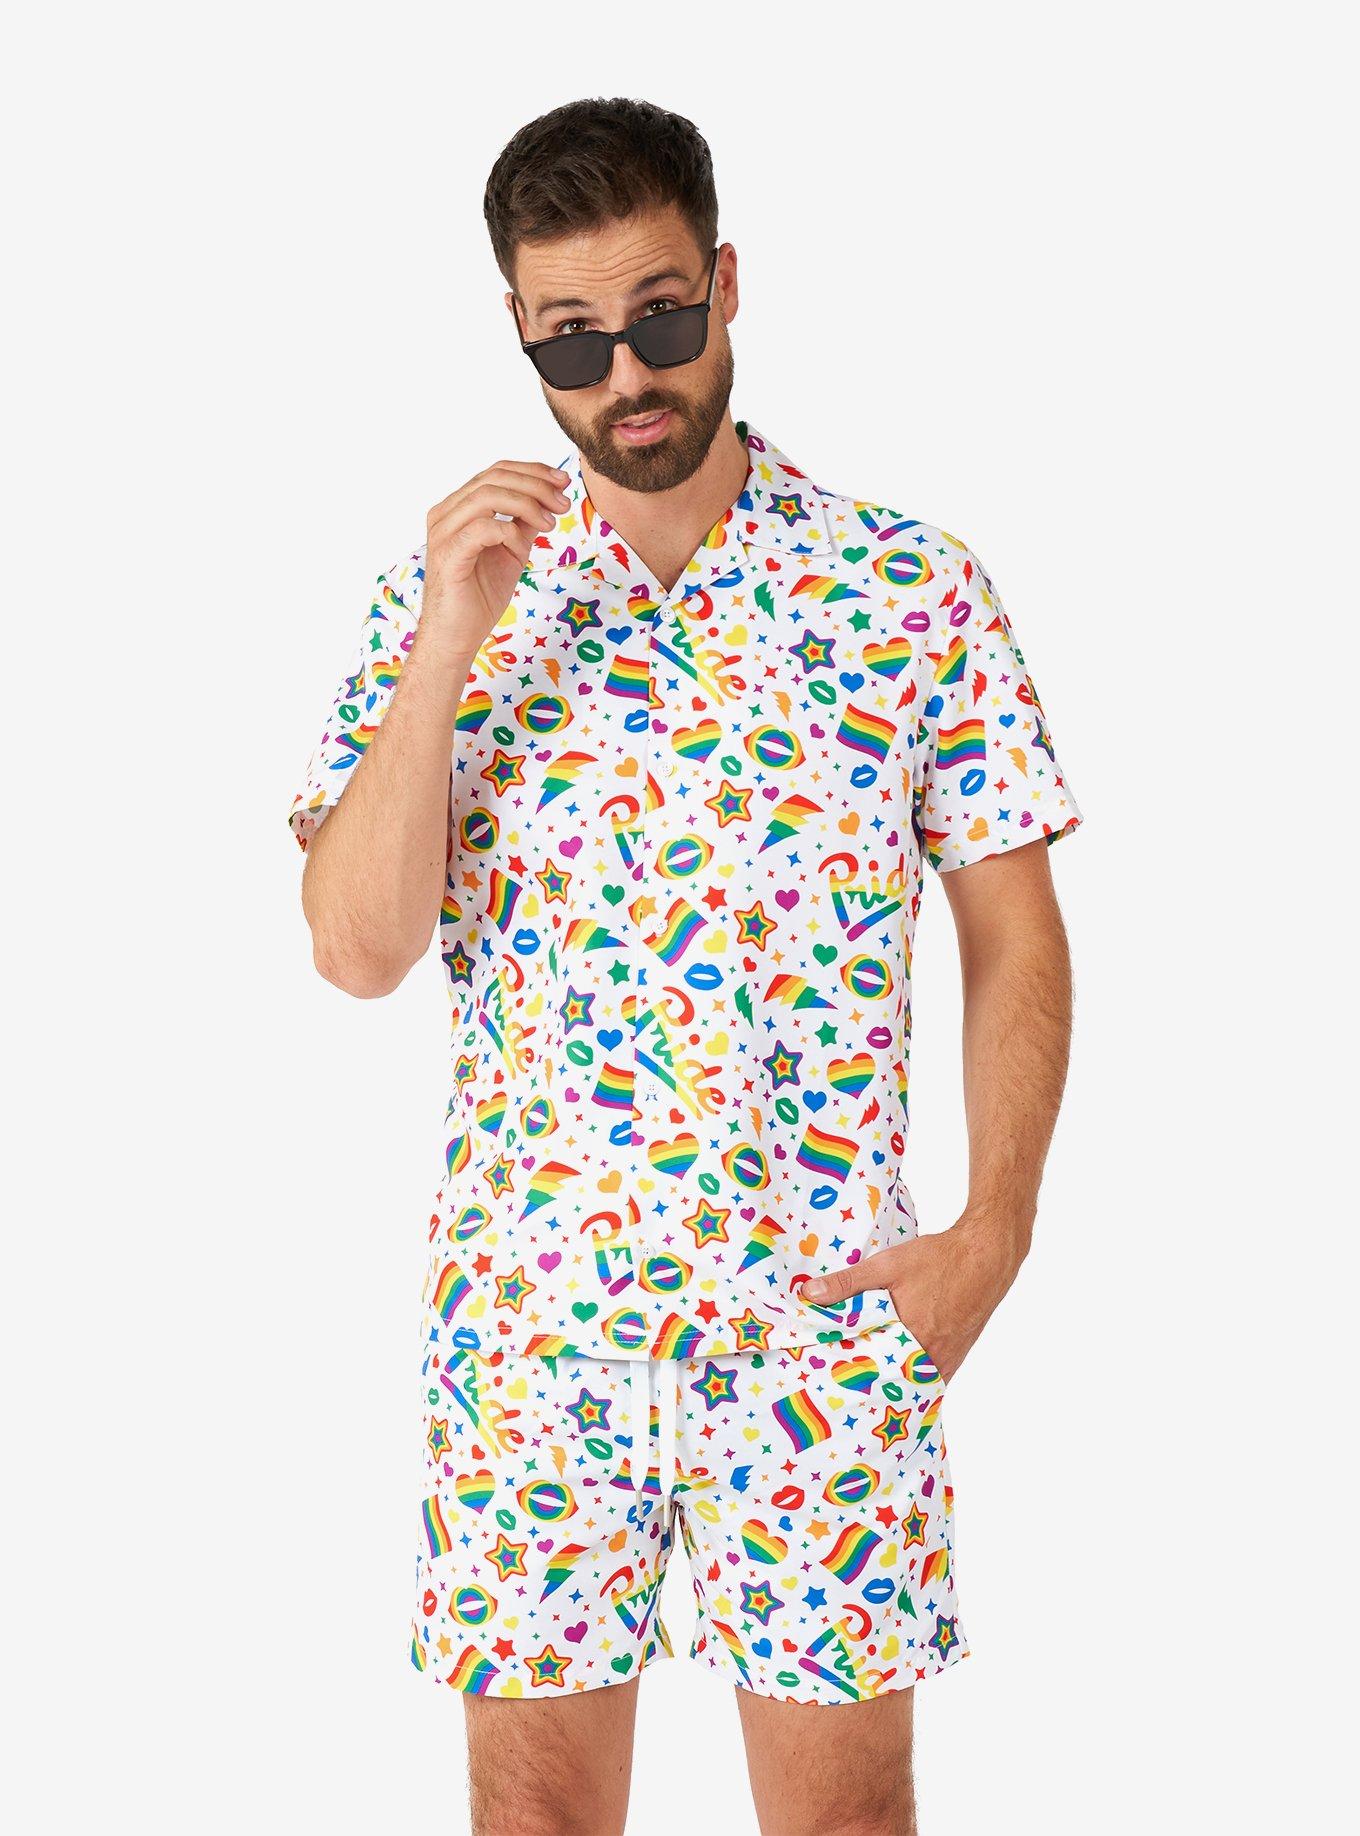 Pride Icons White Button-Up Shirt and Short Set, BRIGHT WHITE, hi-res